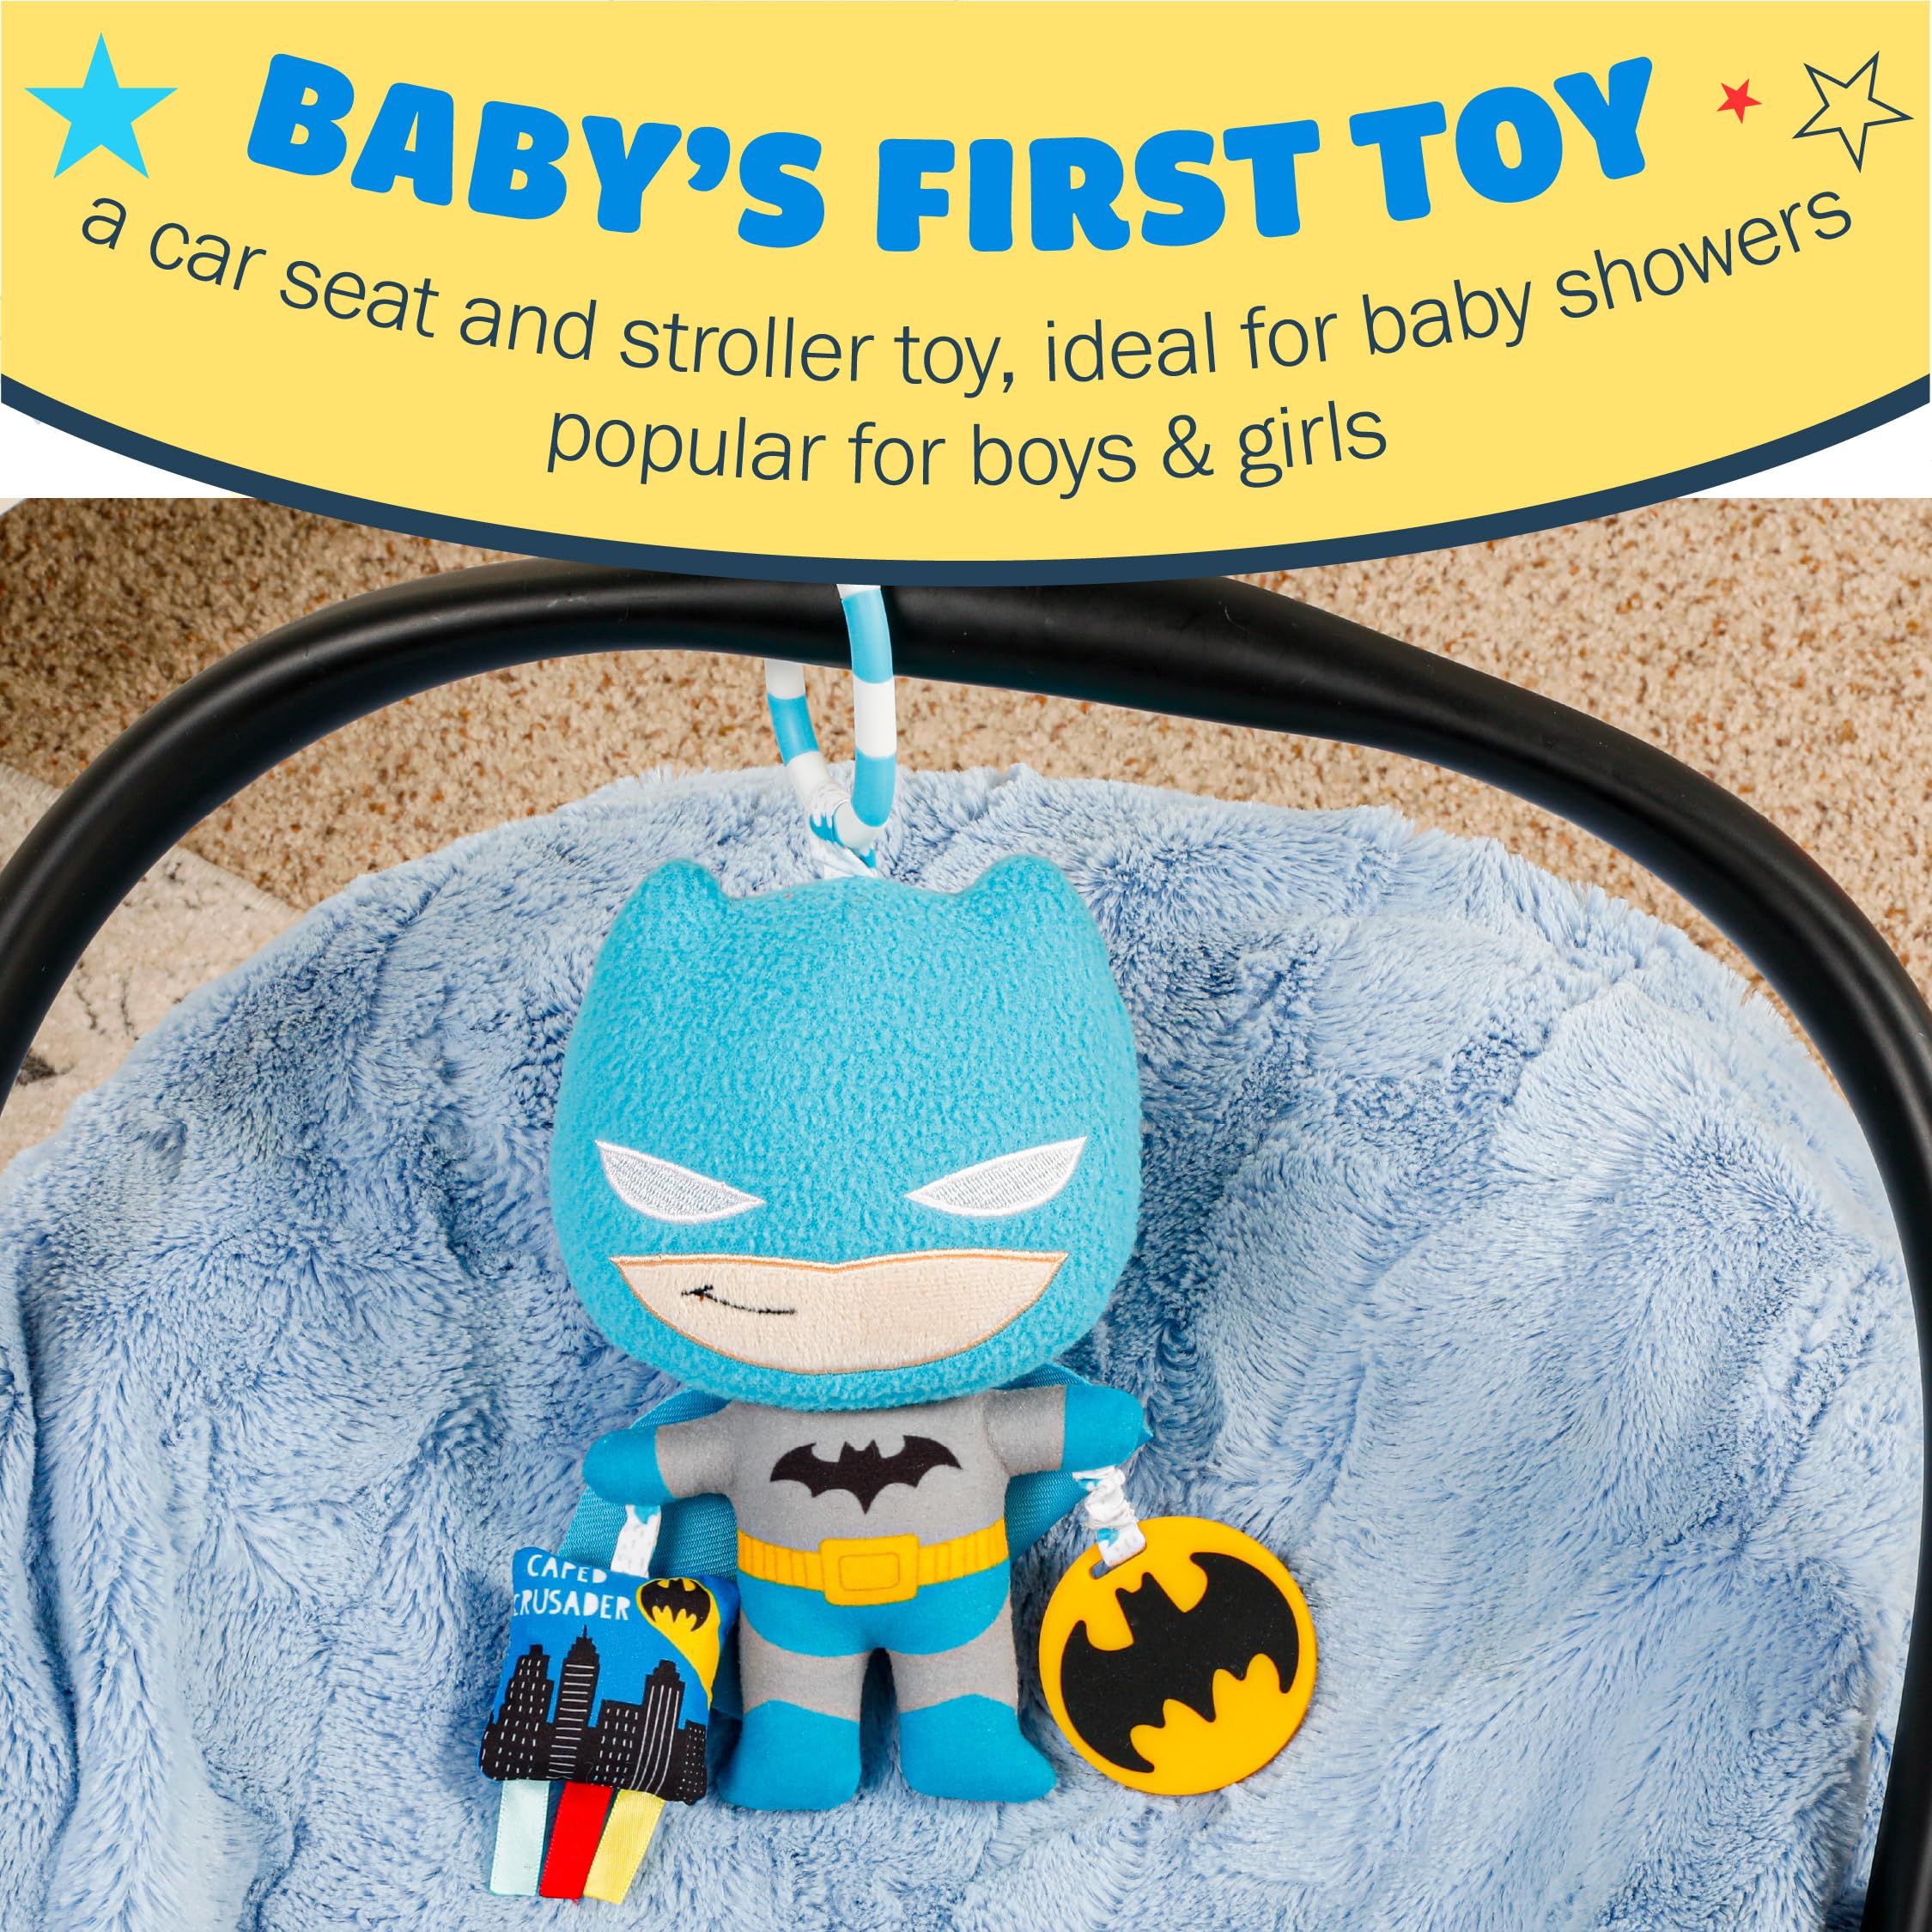 KIDS PREFERRED DC Comics The Batman Multi Sensory Activity Toy with Teethers, Crinkle Textures, and Clip for On The Go Fun for Infant and Baby Boys and Girls